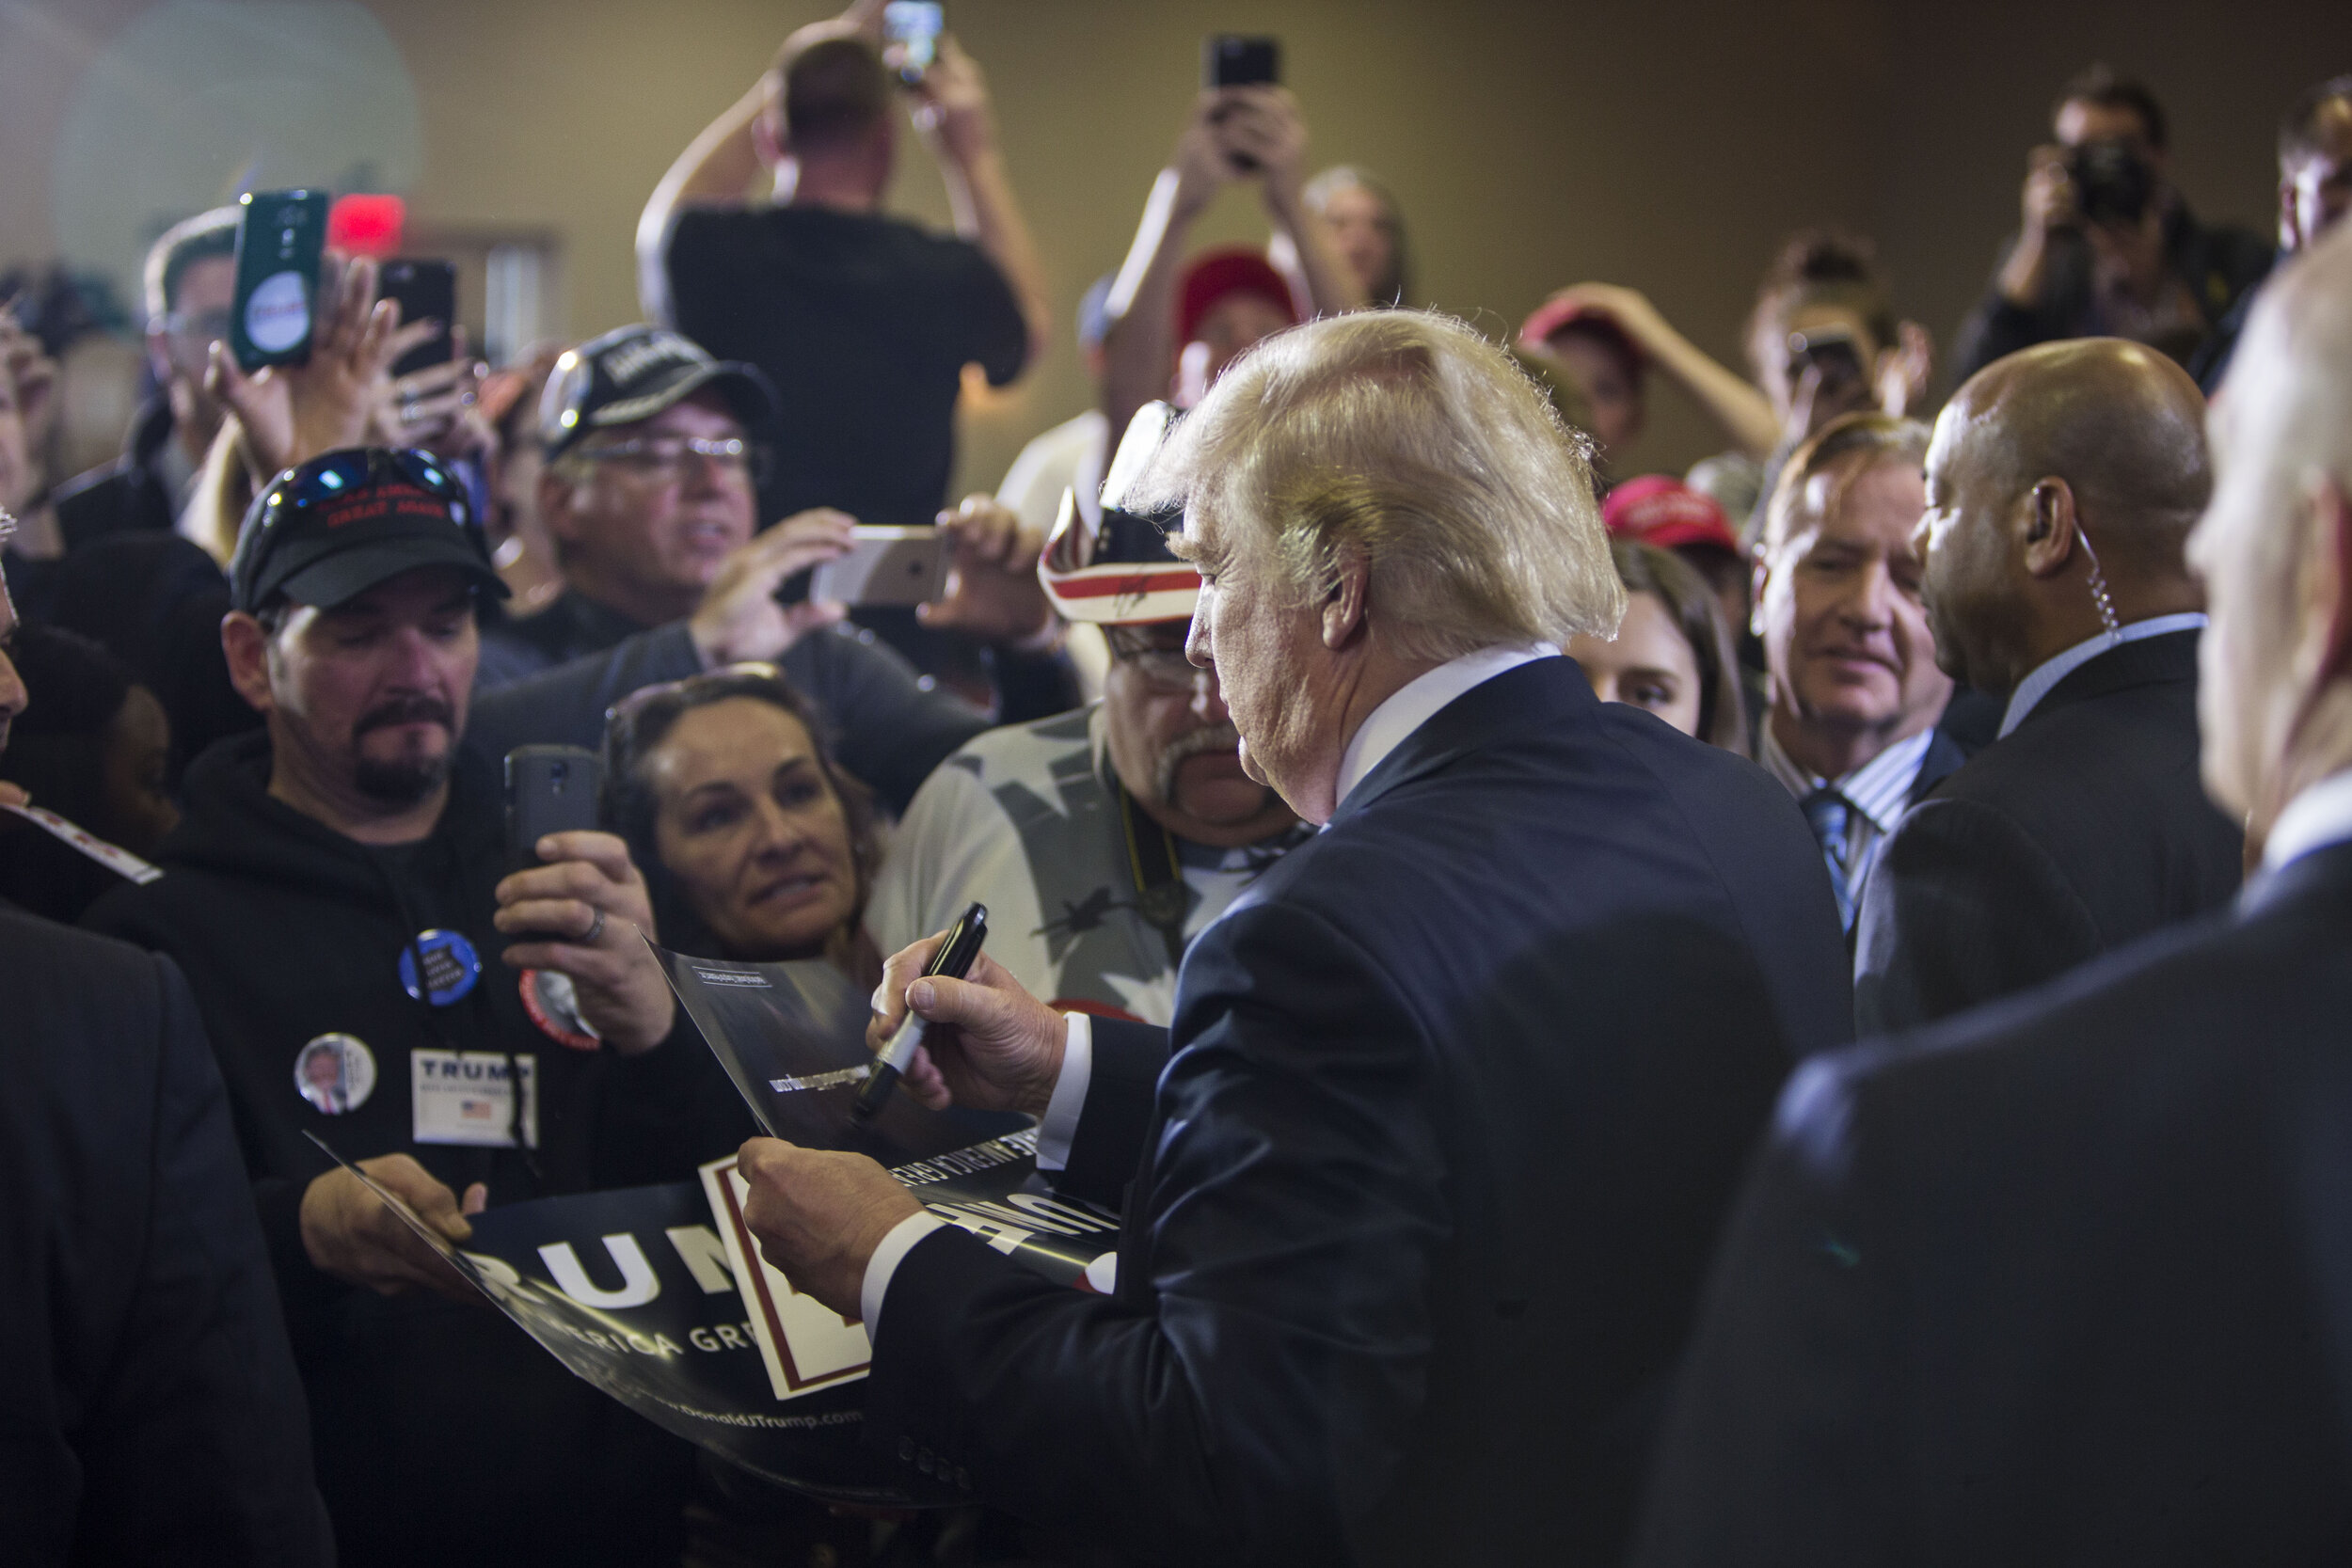  Donald Trump signs autographs for supporters after speaking at a campaign event. 